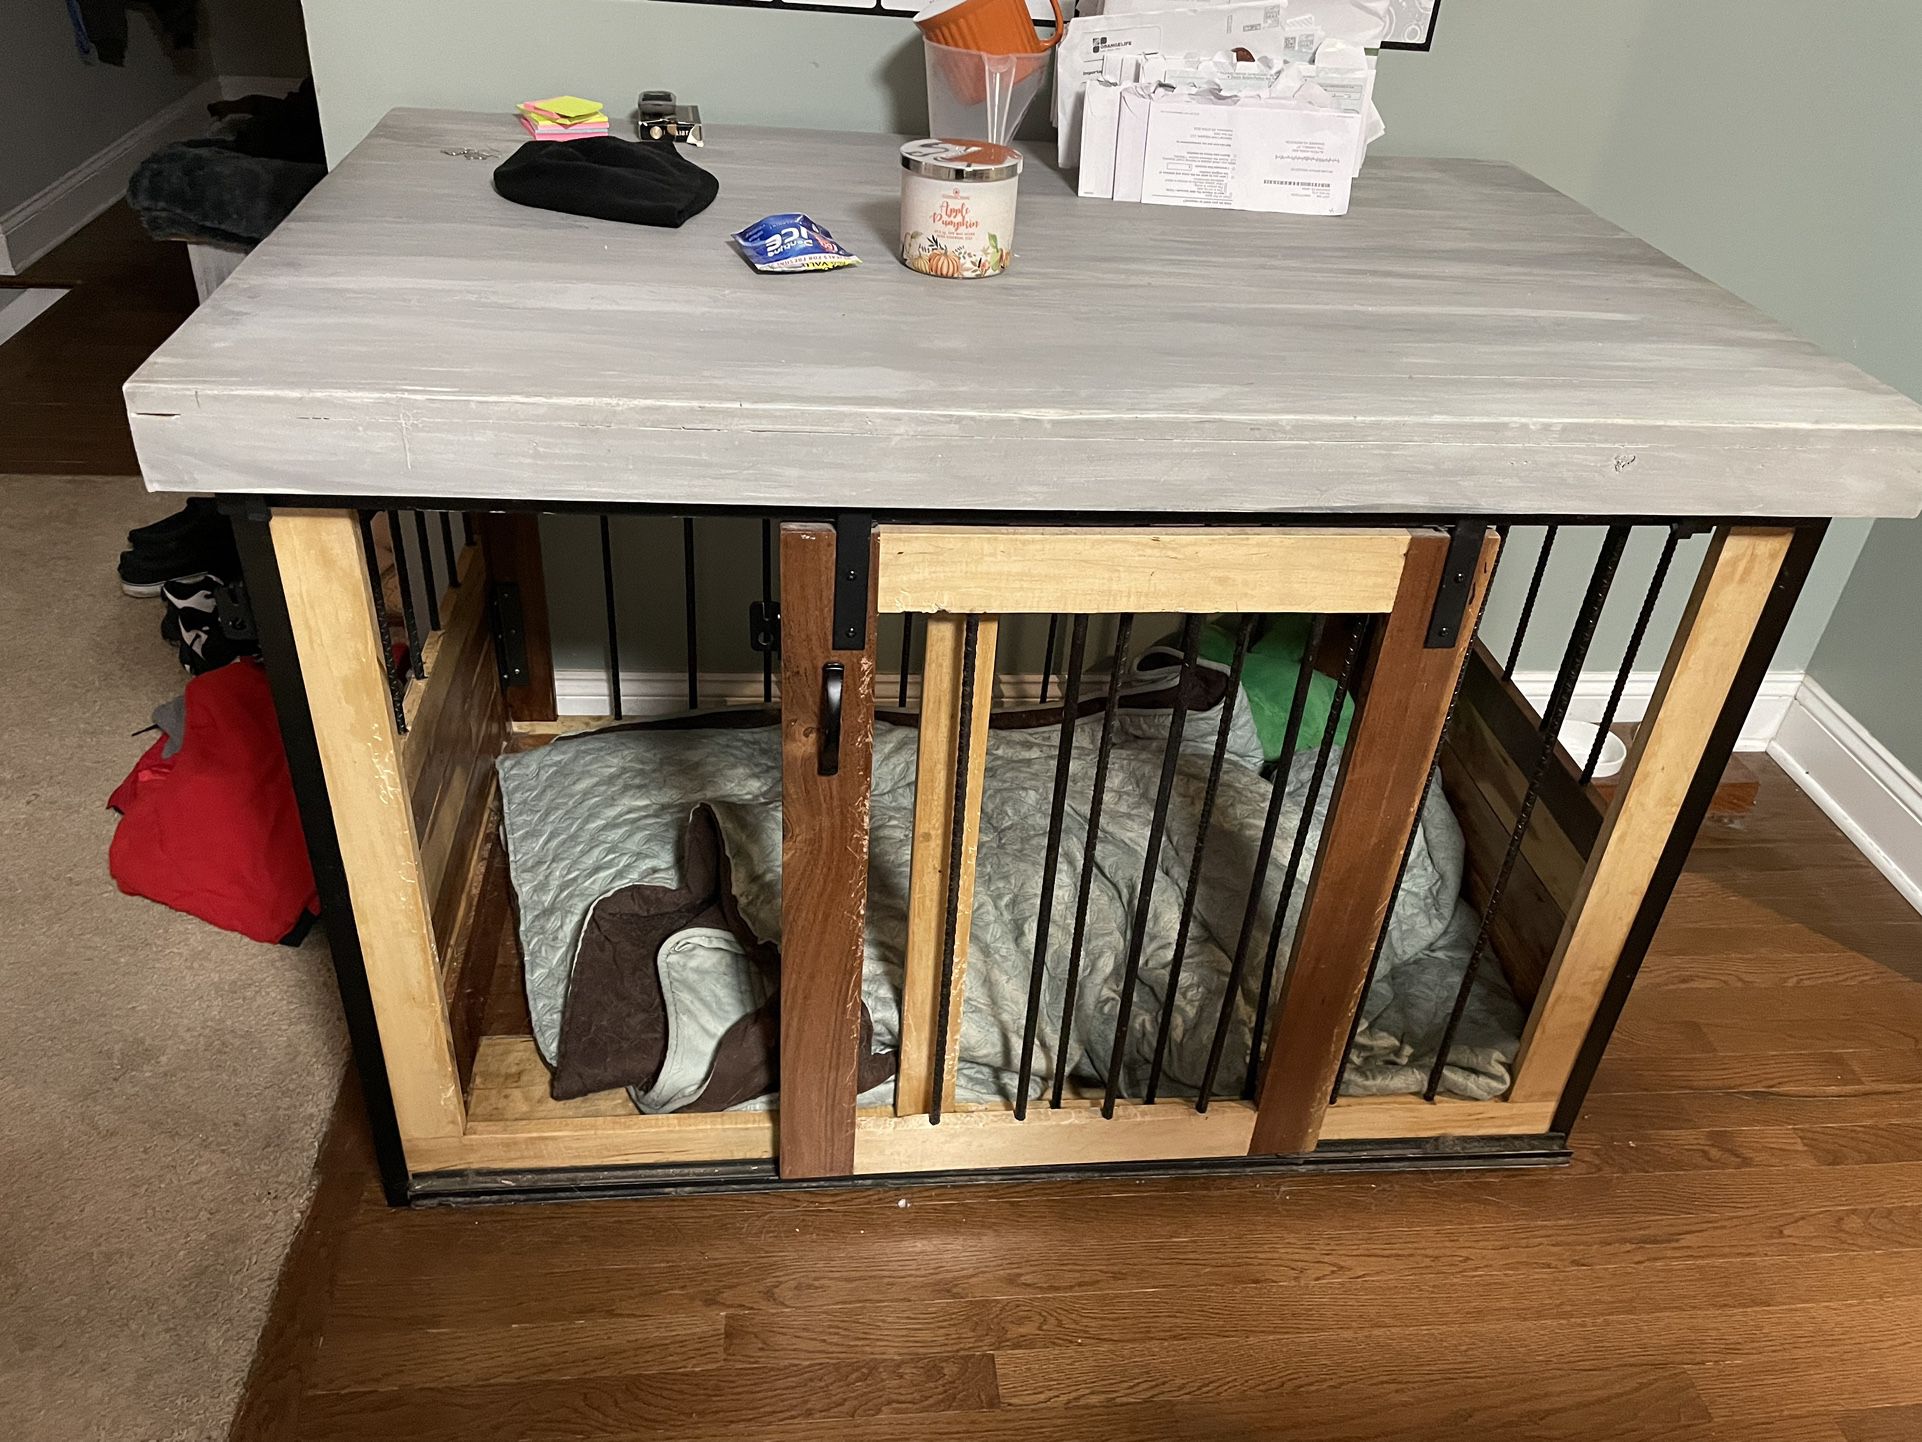 Handcrafted Wood Kennel 